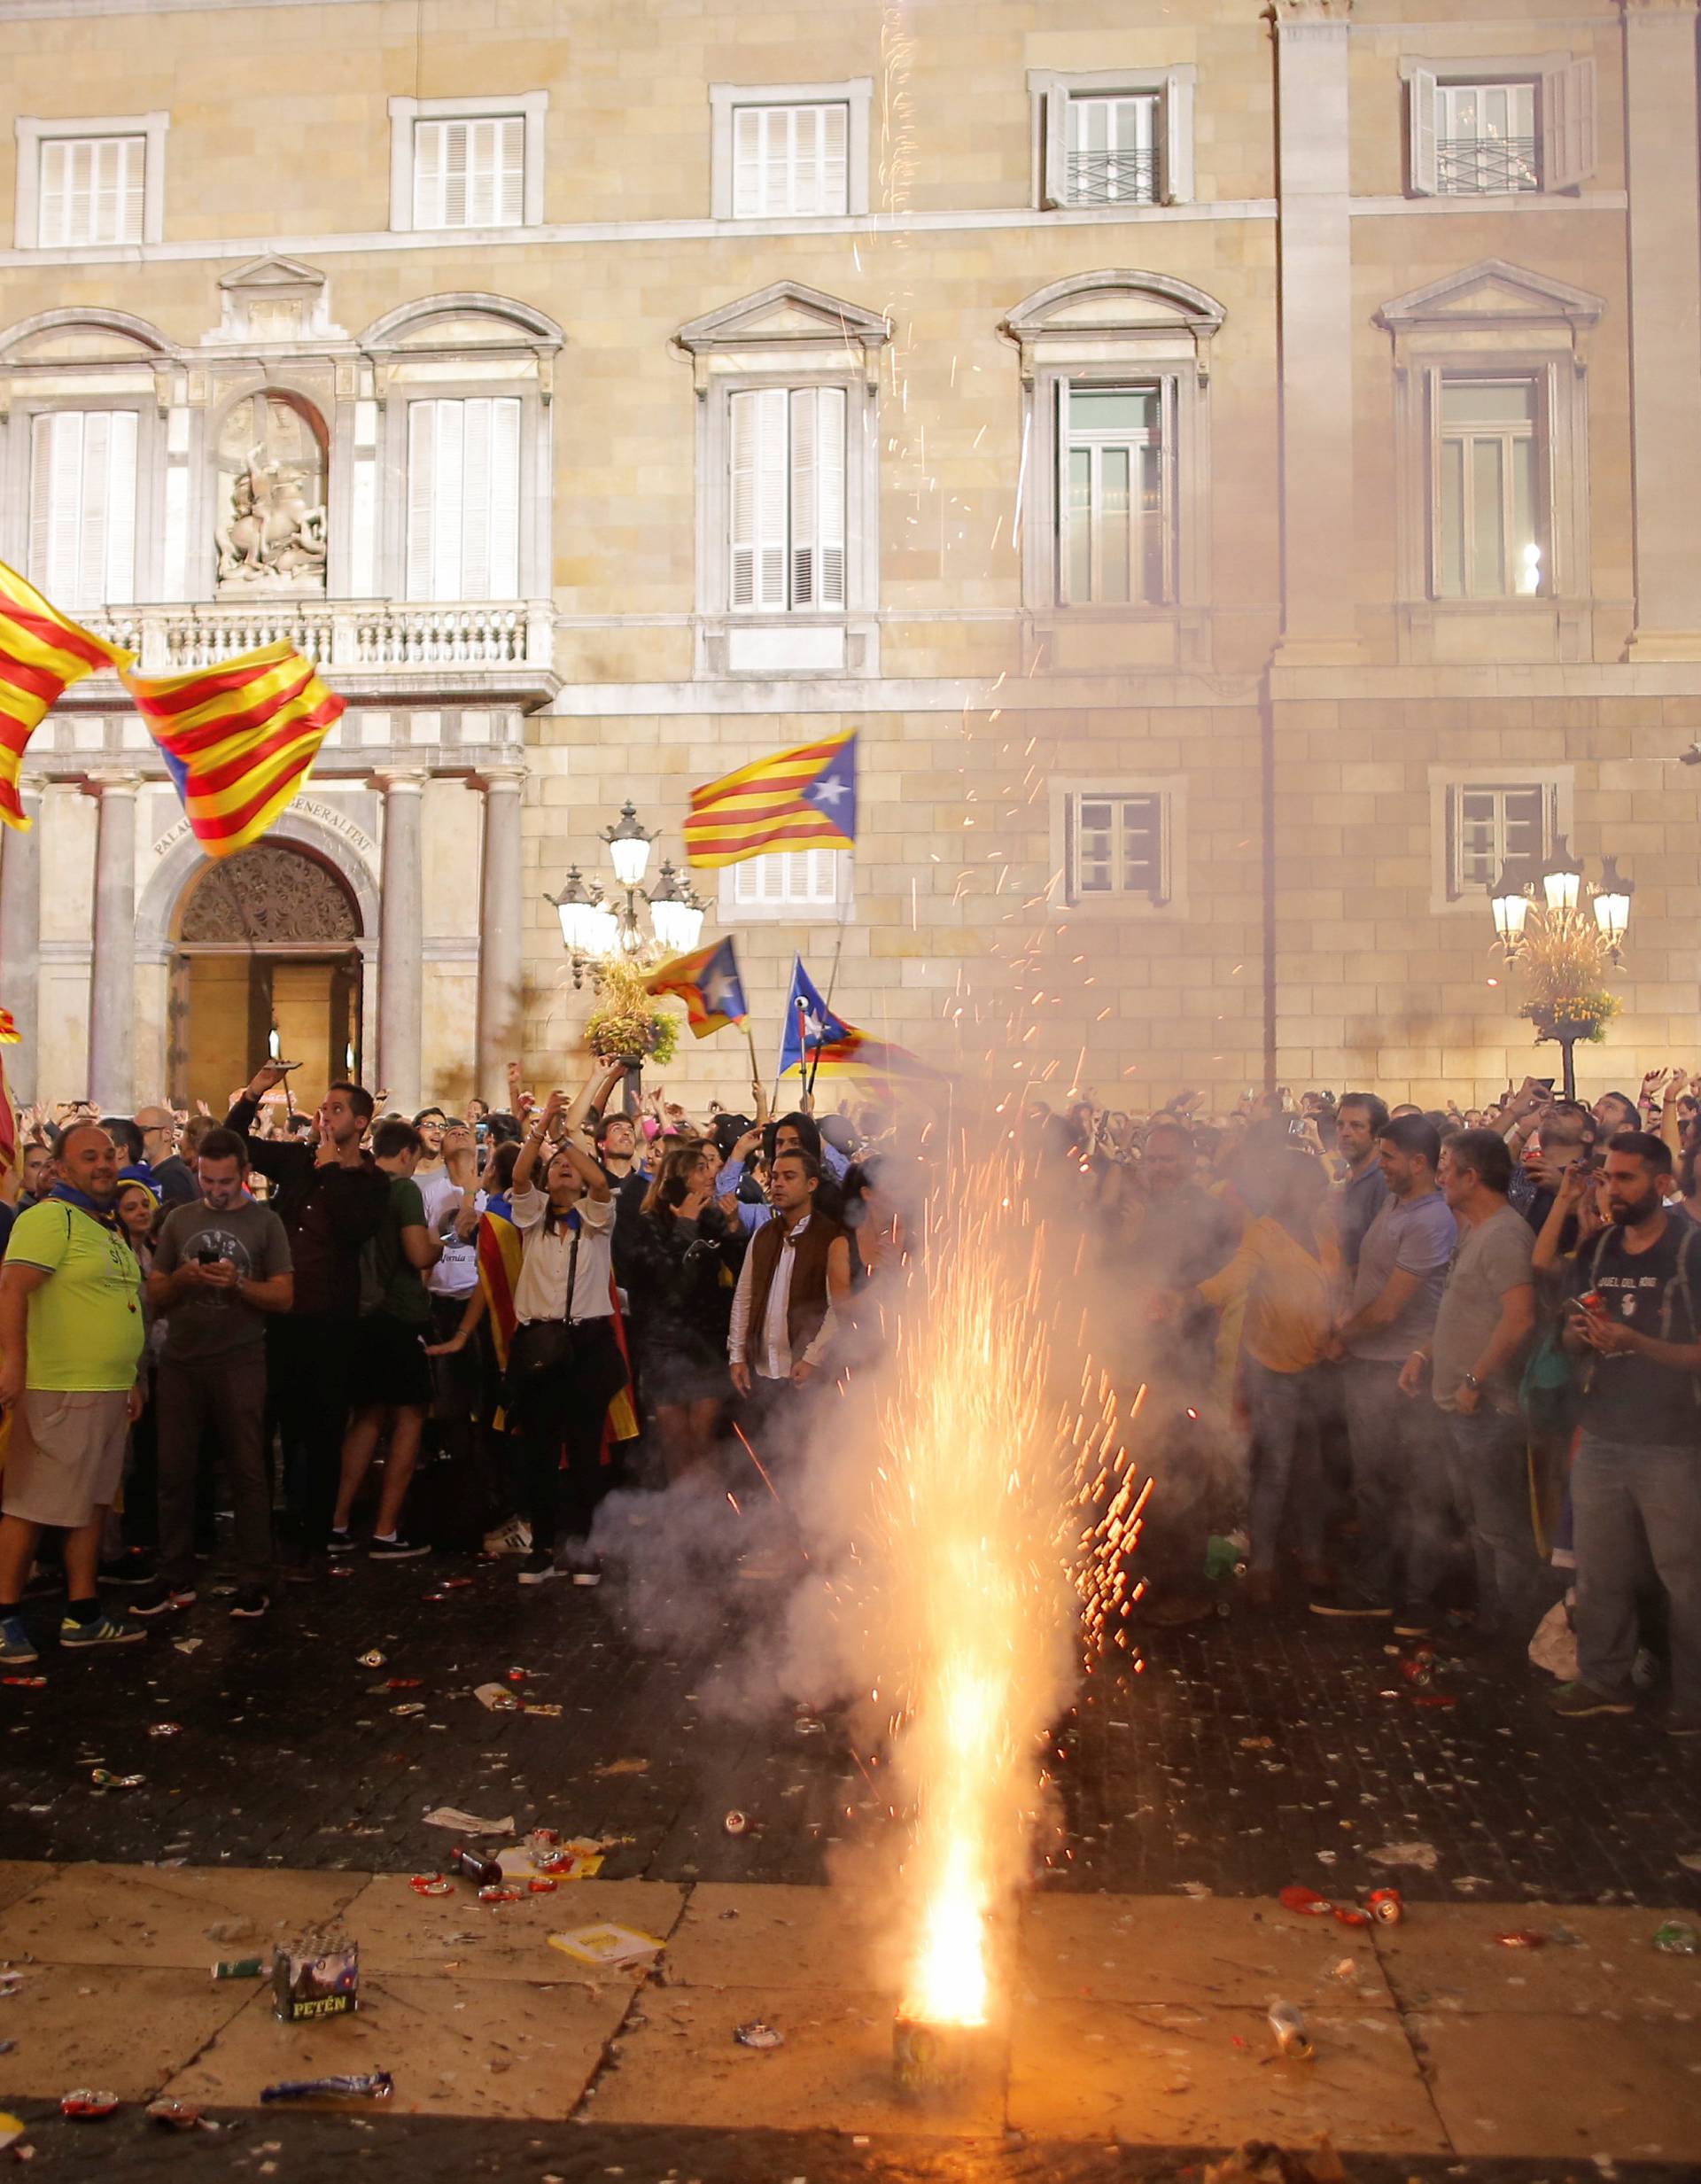 Fireworks are set off in front of the Catalan regional government headquarters during celebratrions after the Catalan regional parliament declared independence from Spain in Barcelona